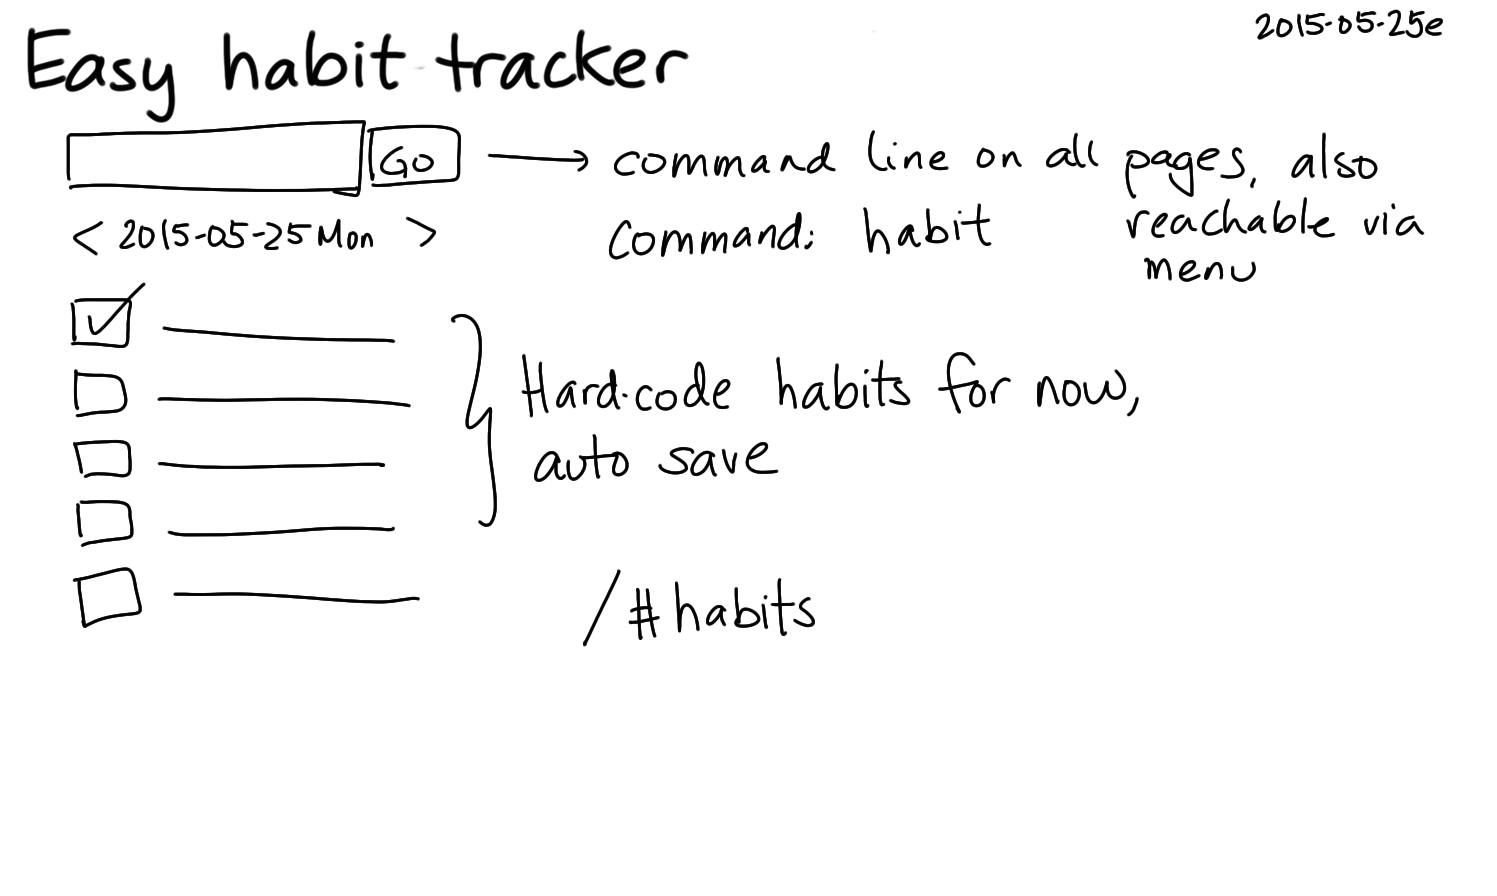 2015-05-25e Easy habit tracker -- index card #pda.png